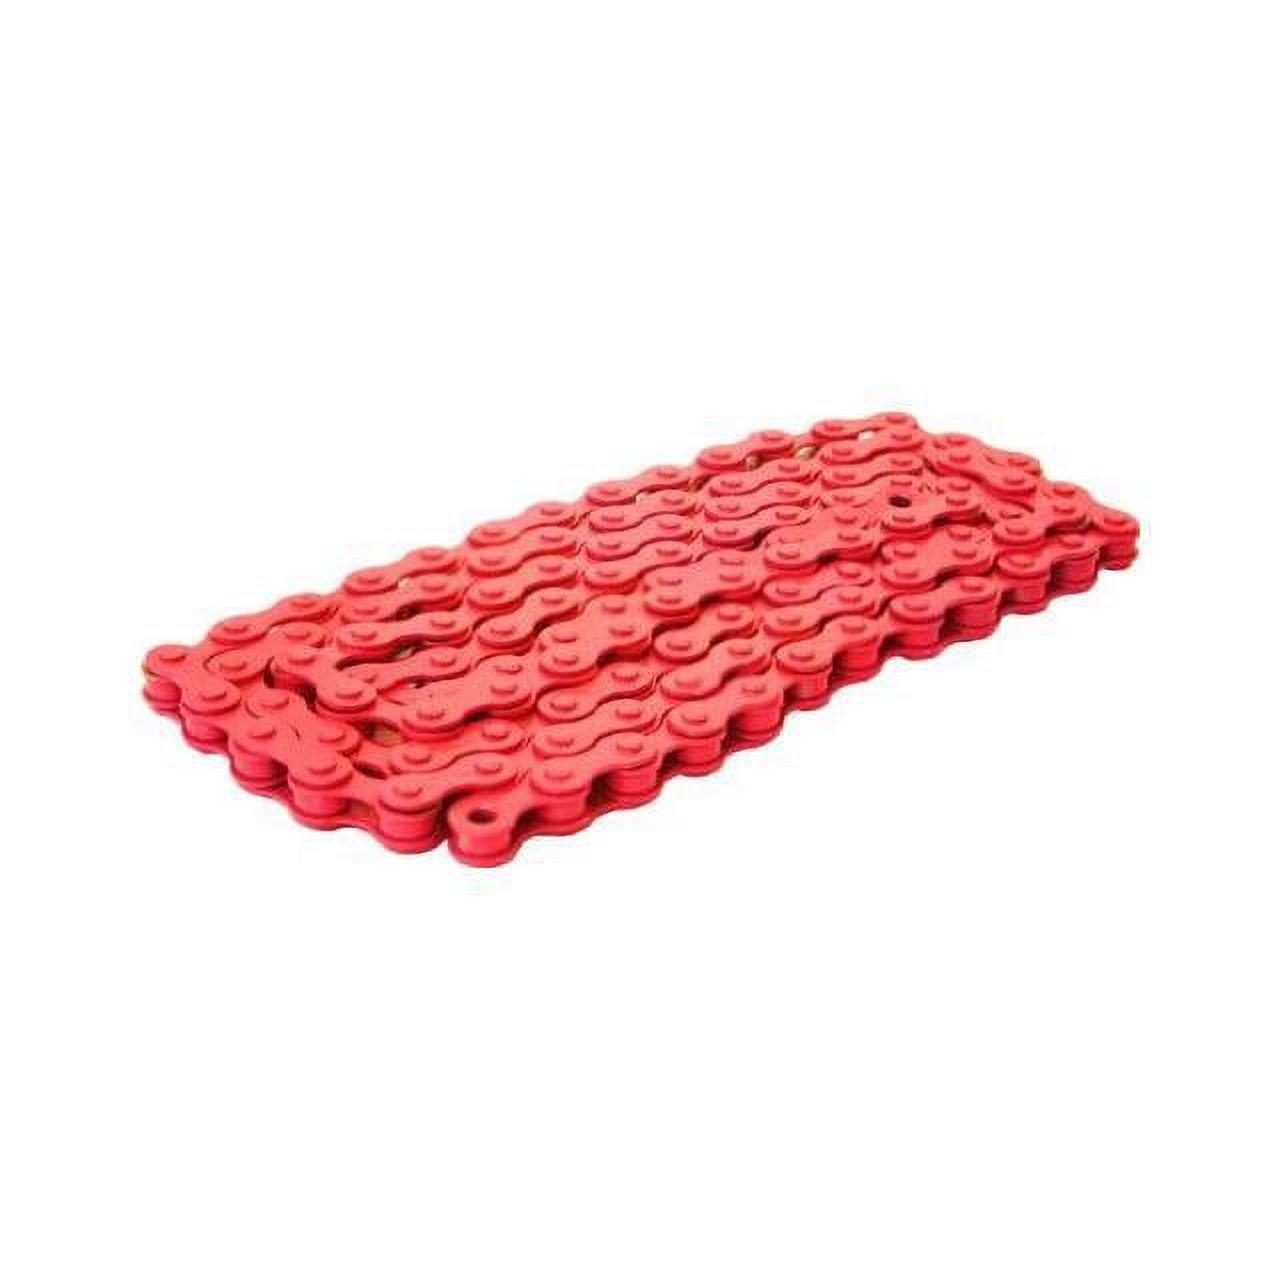 DUO Bicycle Parts BC1218CR Bicycle Chain Red 0.5 x 0.12 in. - image 1 of 1